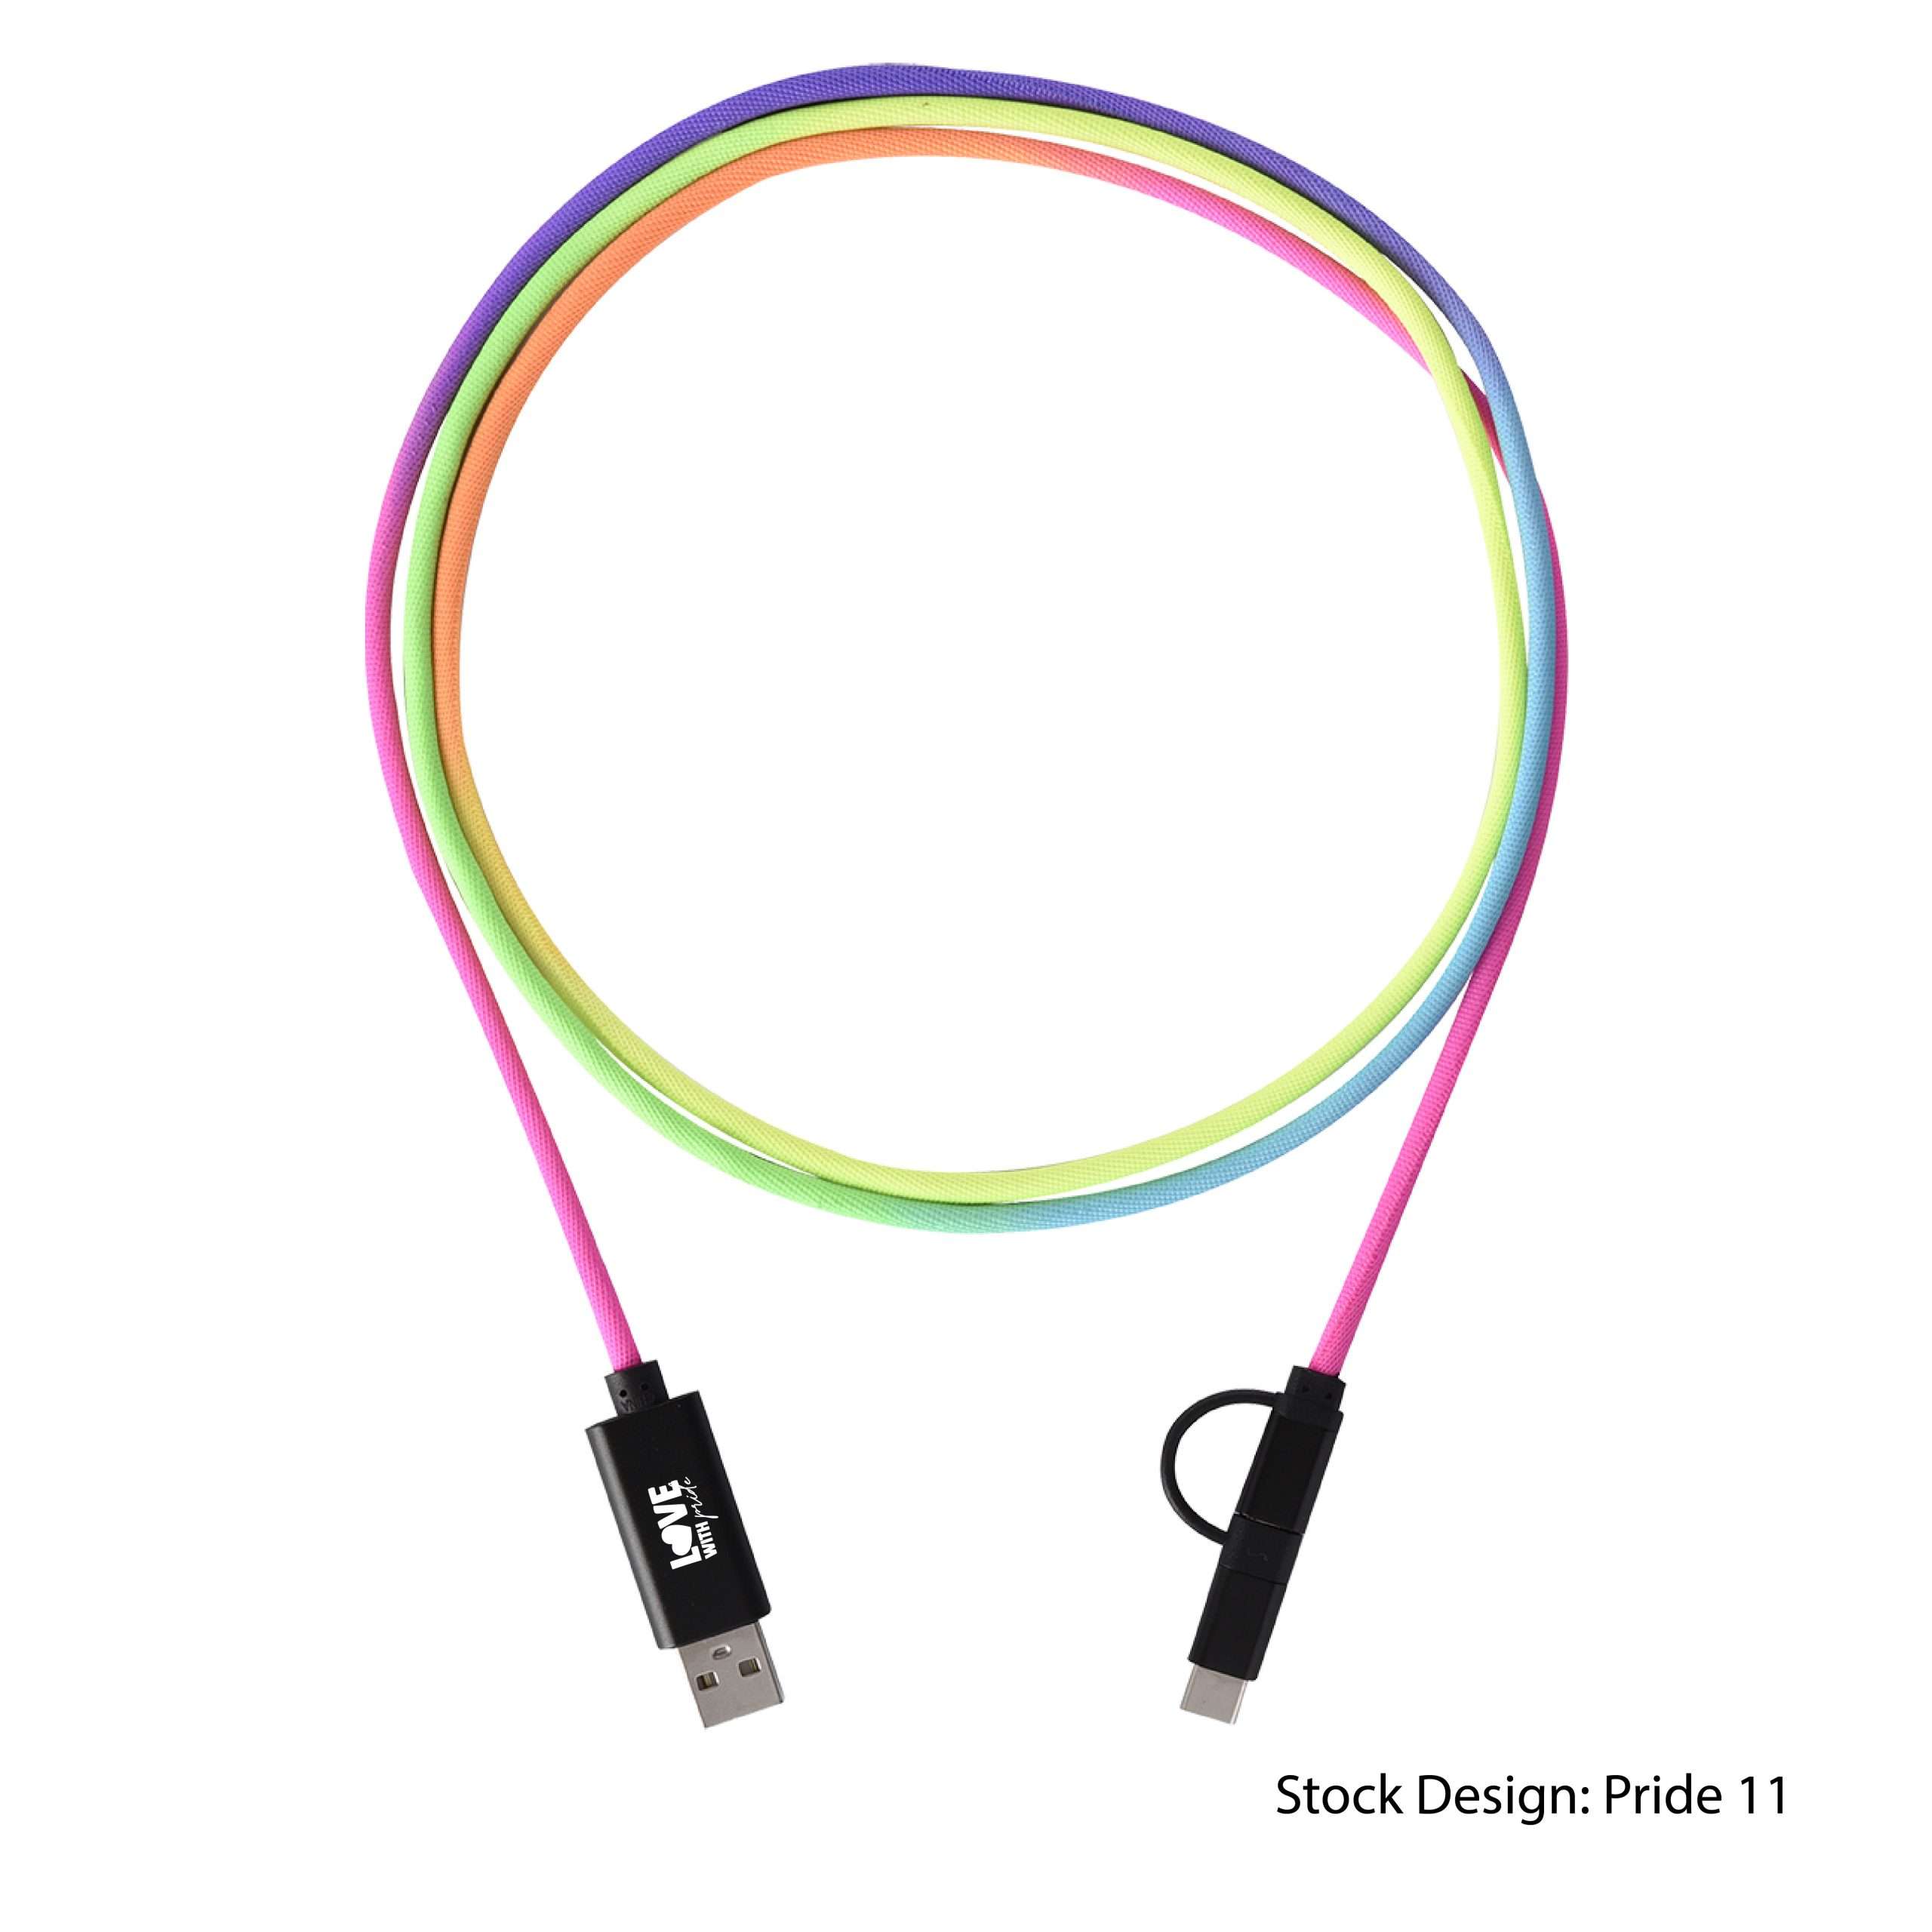 Rainbow Braided Charging Cable